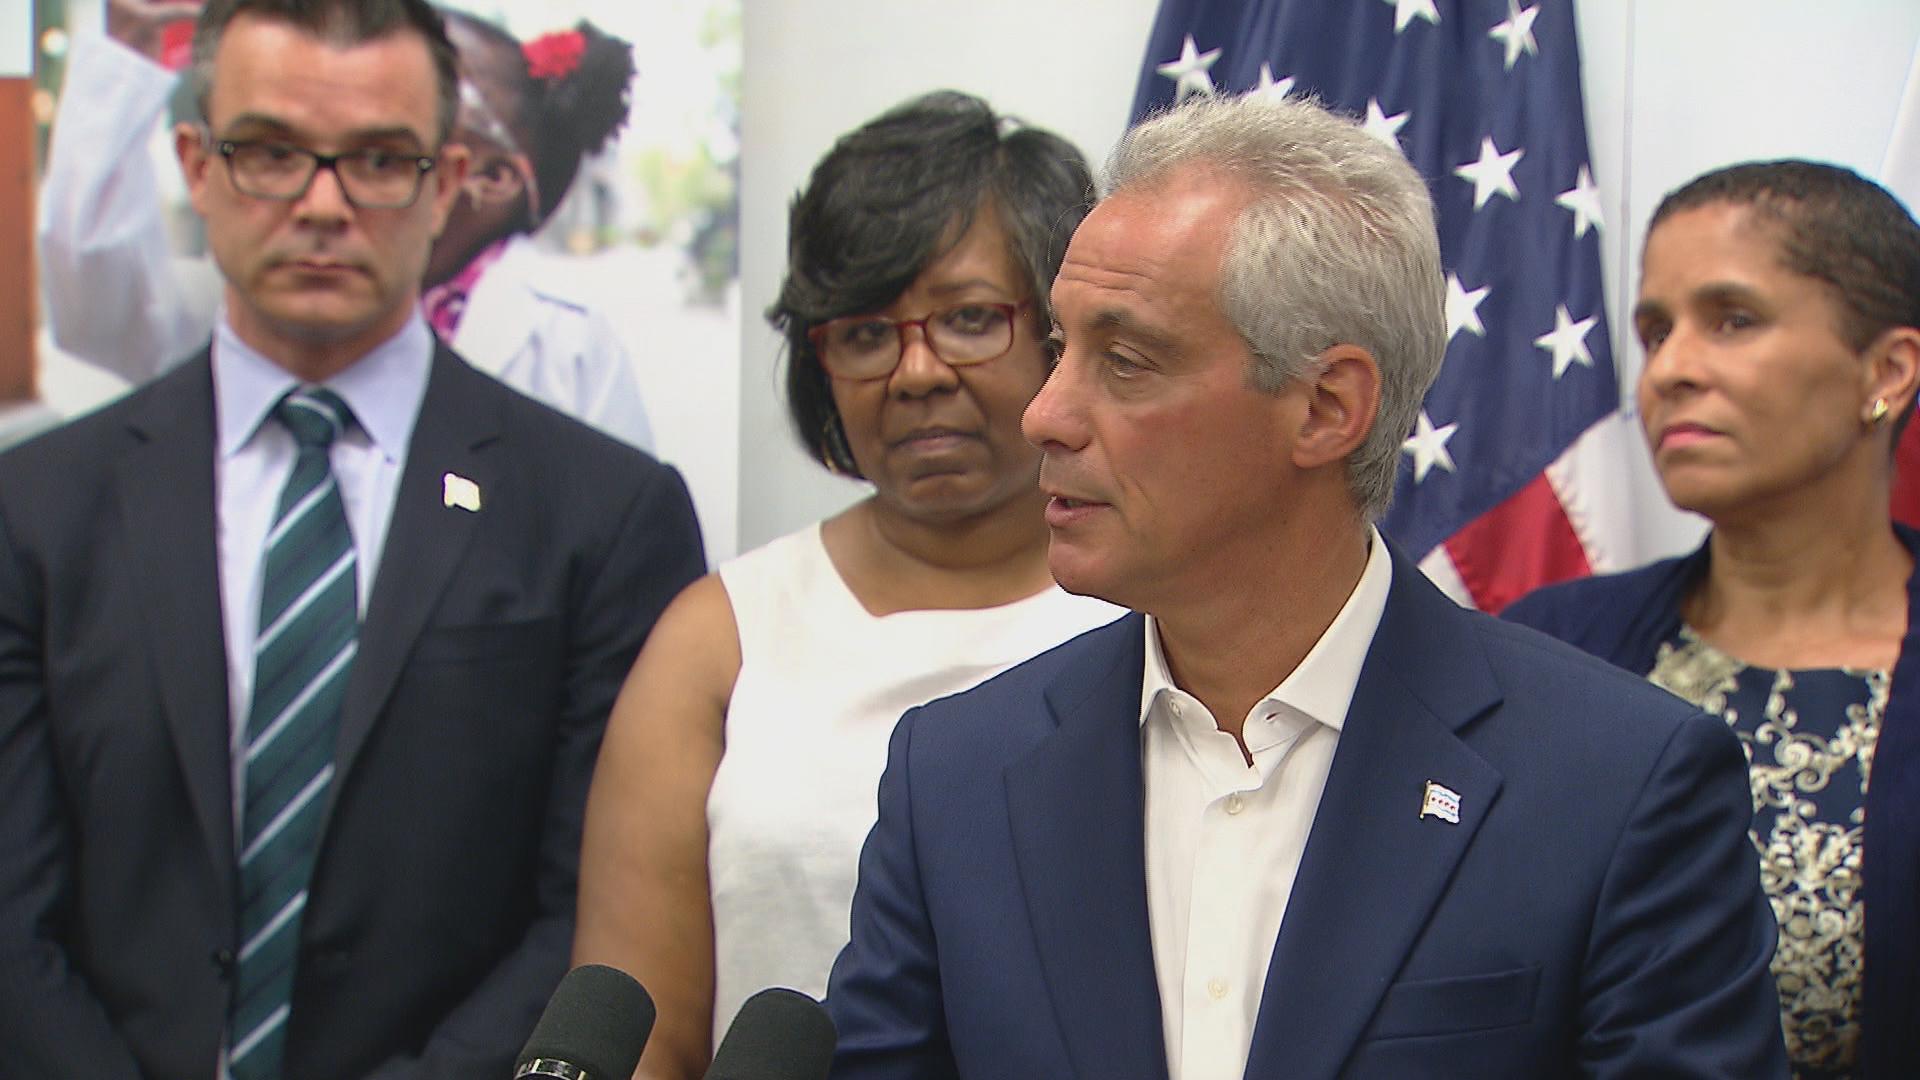 “When I got into office … all four pensions were upside-down. All four pensions are now right-side up,” Mayor Rahm Emanuel said at a press conference Monday. (Chicago Tonight)